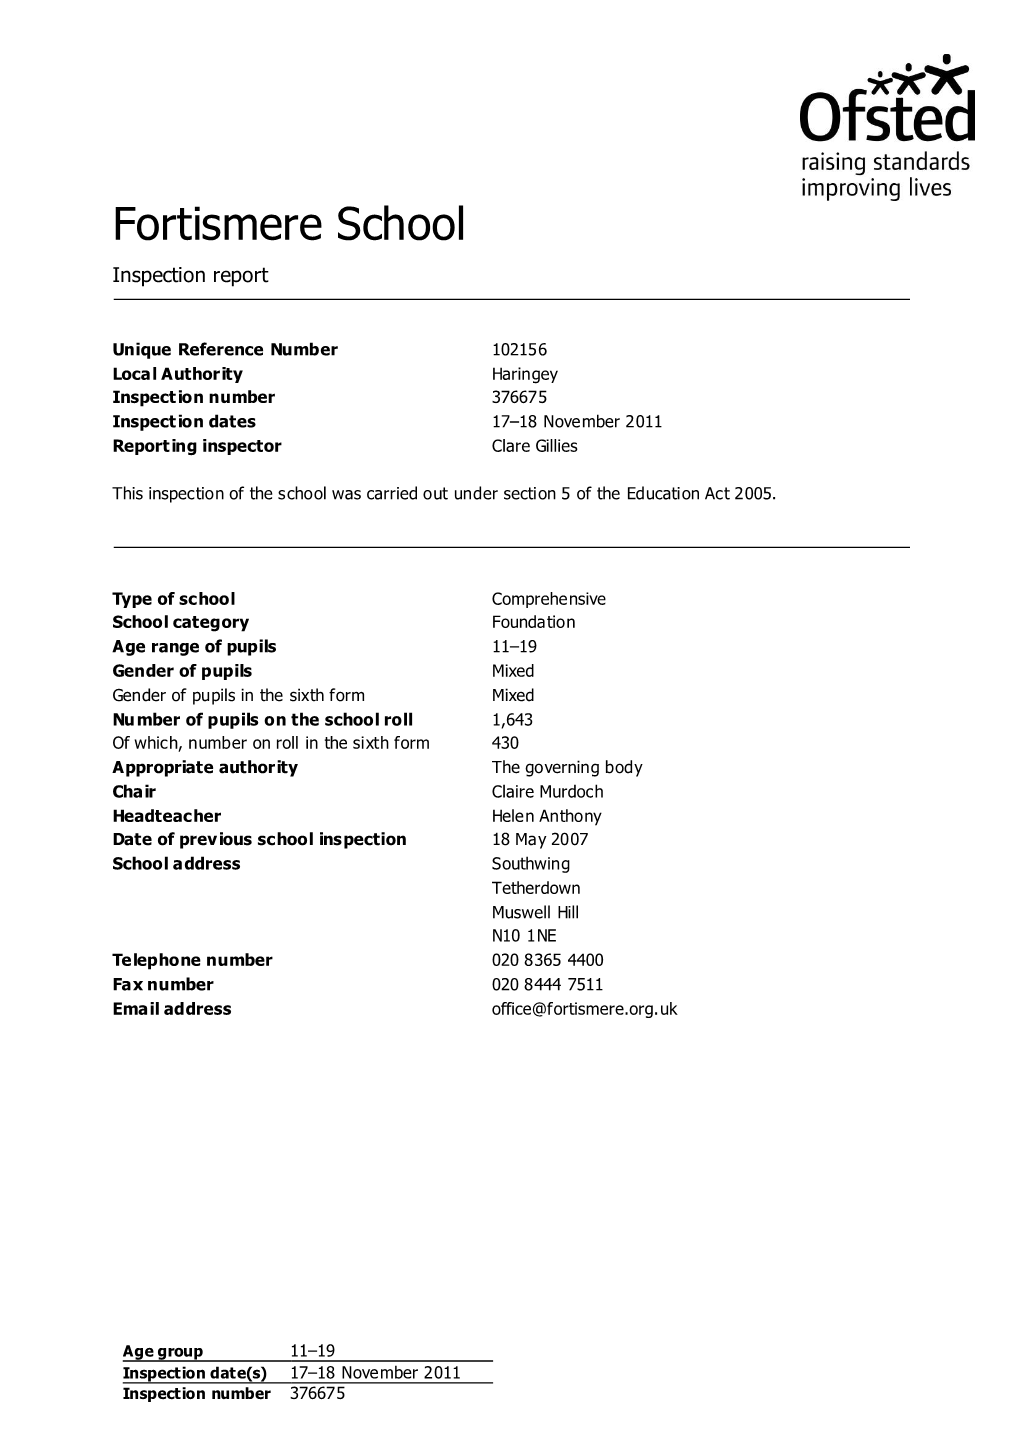 Fortismere School Inspection Report